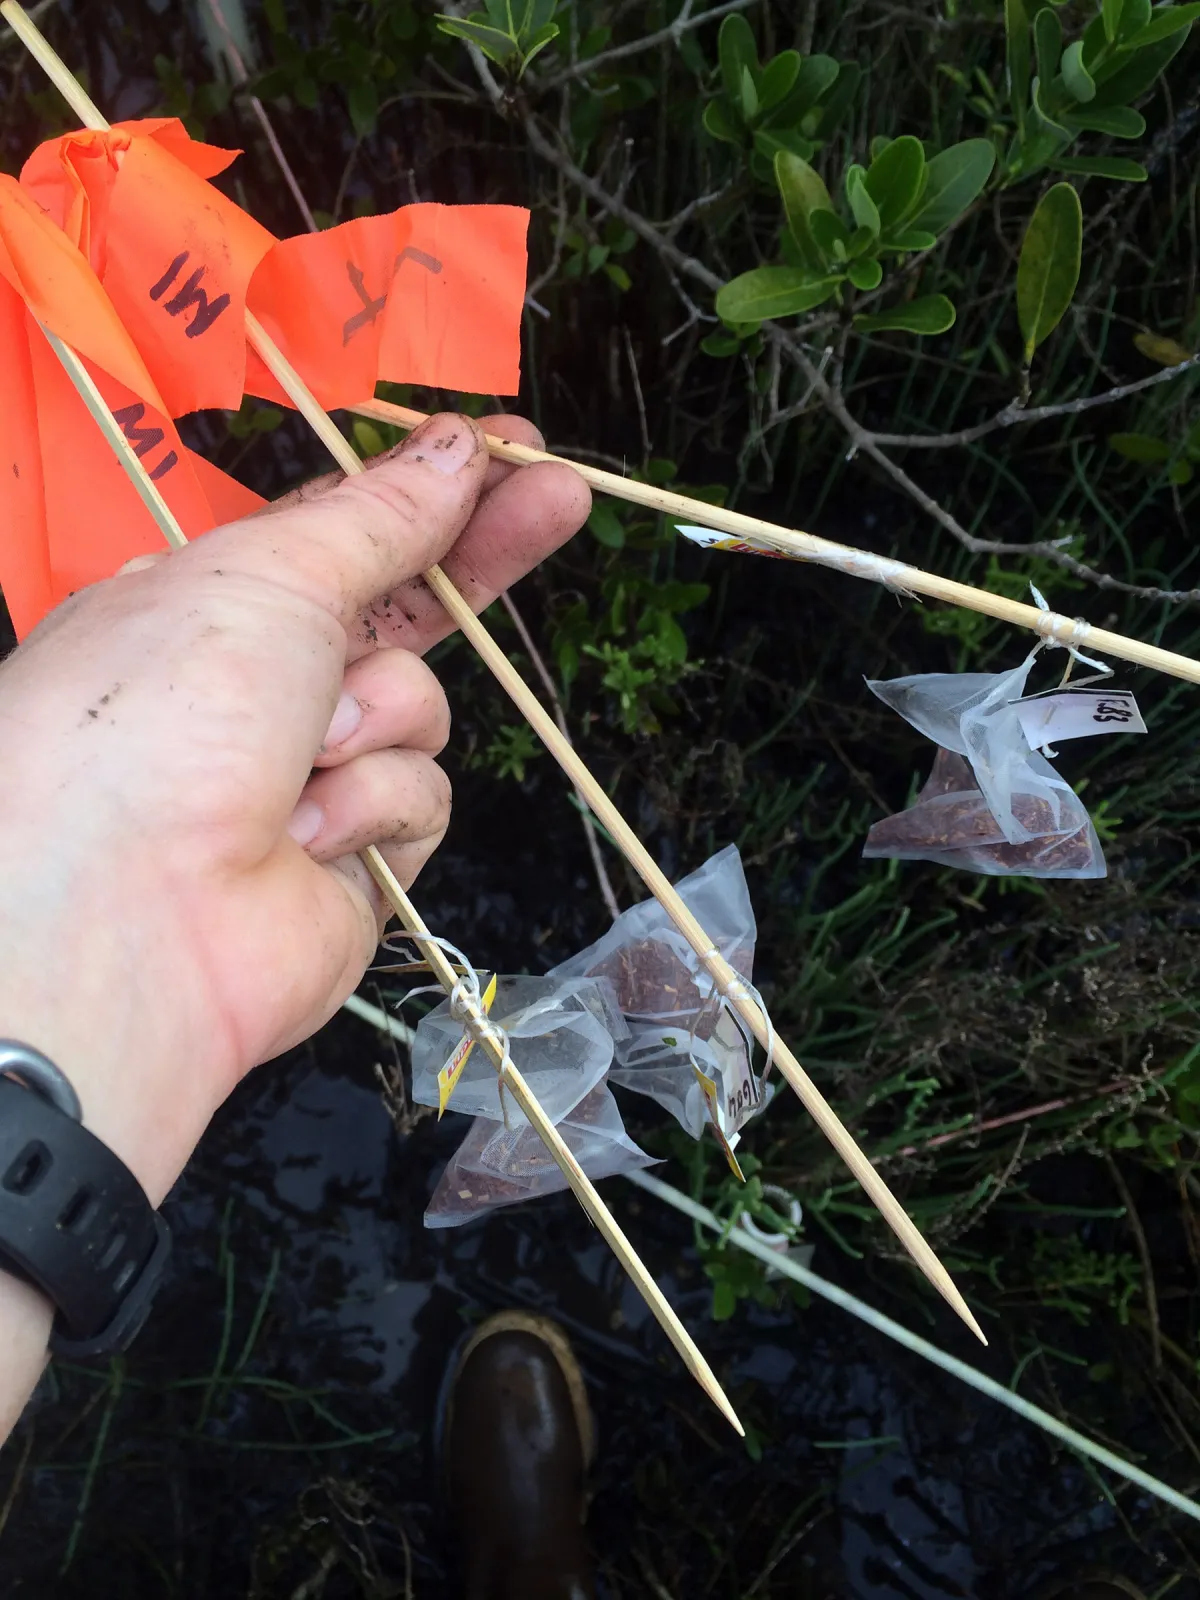 orange-flagged bamboo skewers, on which are tied mesh tea bags full of shredded leaf litter